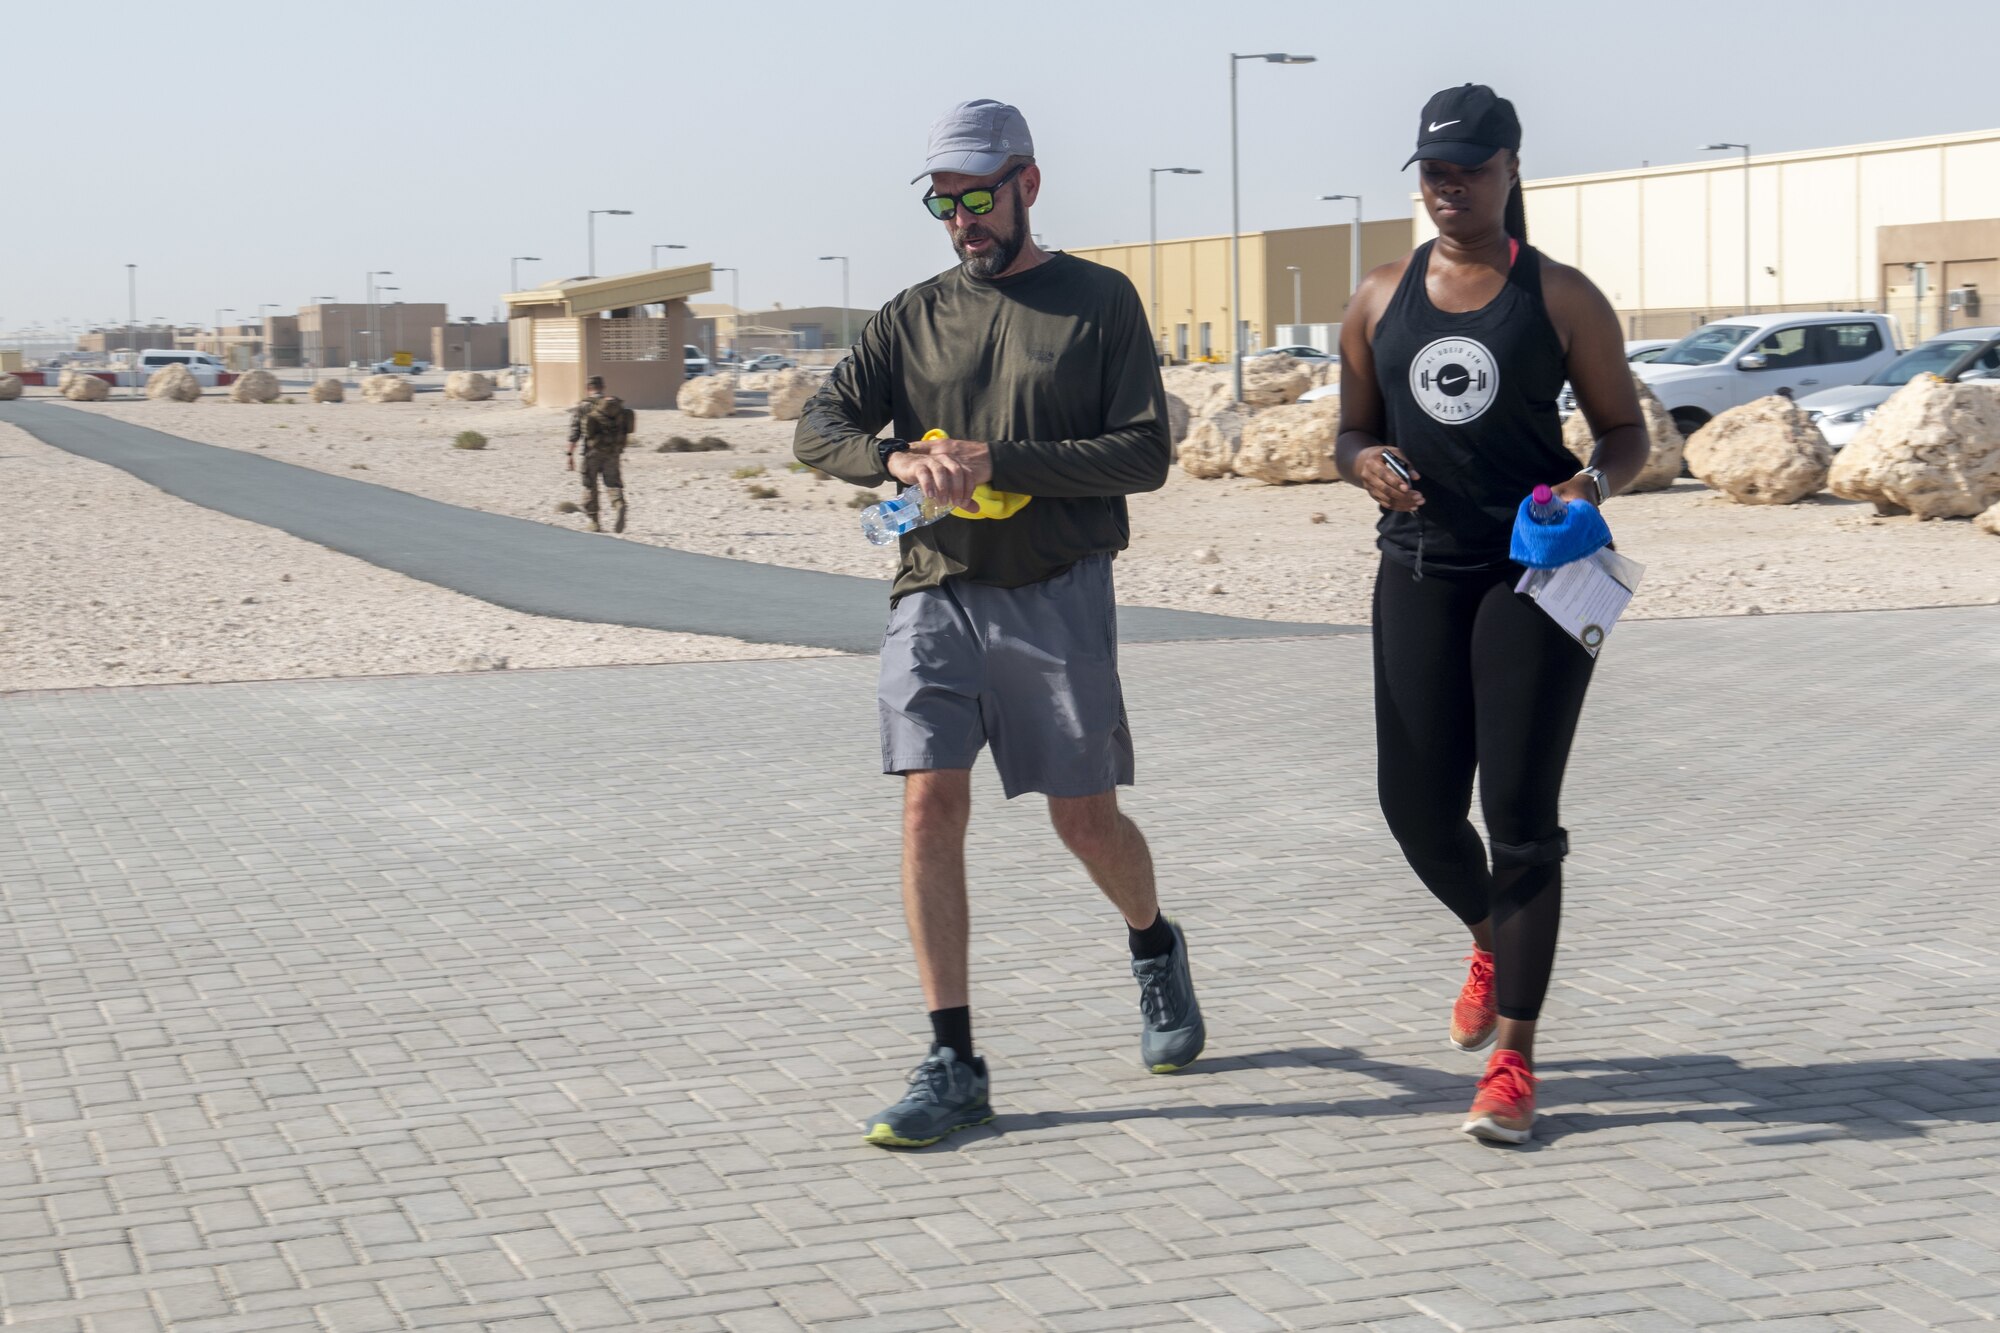 Chief Master Sgt. Tiwanda Wilson, AFCENT/A1 Forward superintendent, left, and Patrick Buzzard, AFCENT Information Protection director, right, jog during Buzzard’s 51-mile run at Al Udeid Air Base, Qatar, July 30, 2021. Buzzard ran 51 miles for his 51st birthday with the help of 13 members from the Combined Air Operations Center. (U.S. Air Force photo by Tech. Sgt. Dylan Nuckolls)